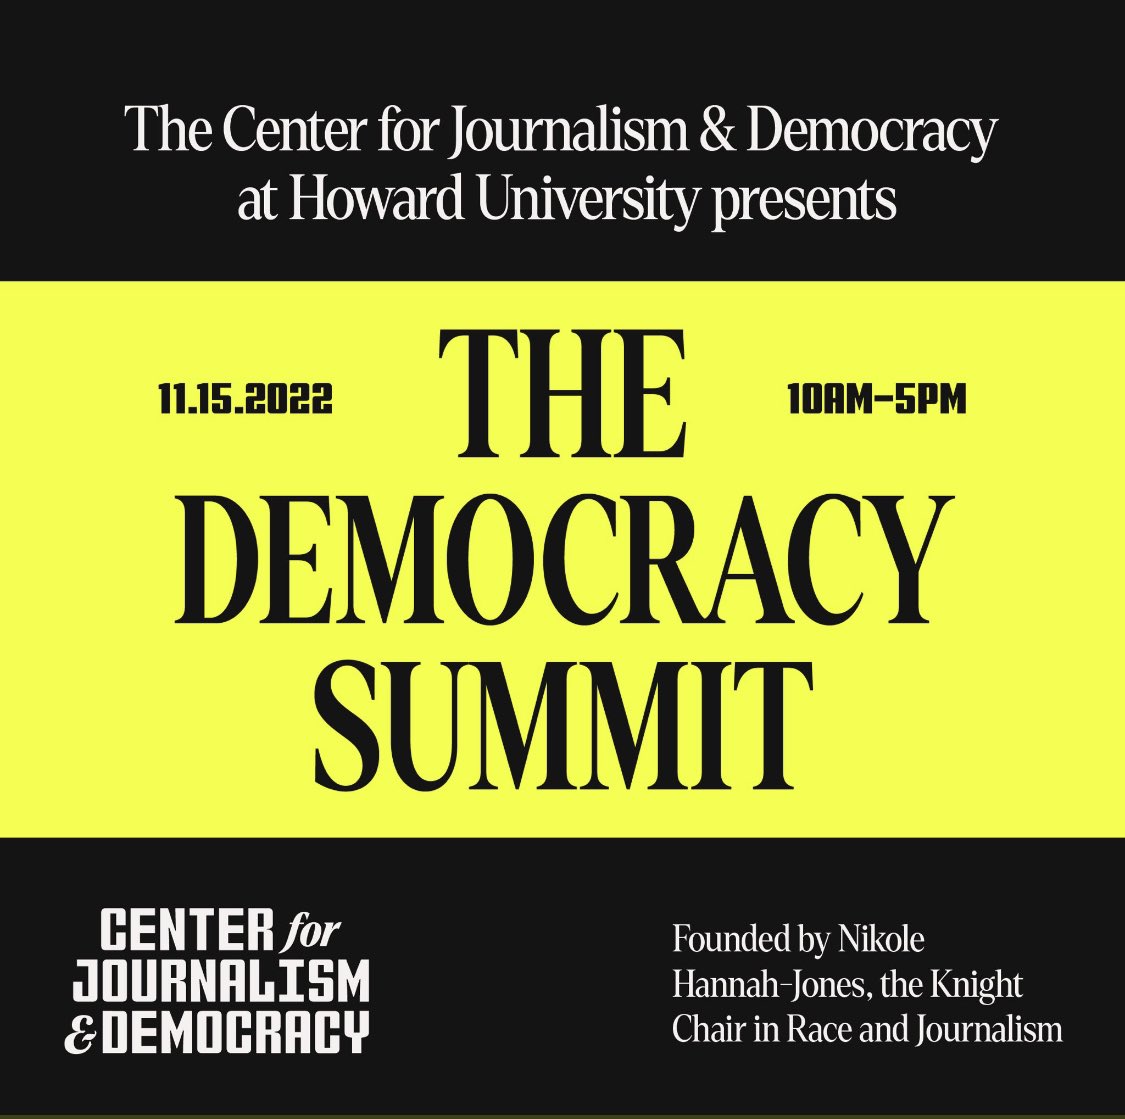 If you're a journalist trying to figure out, join the Center for Journalism & Democracy Nov. 15 @HowardU for our Democracy Summit where we'll learn from democracy experts, historians and journalists. Summit is free. And @C4JDHowardU's offering a limited number of travel stipends